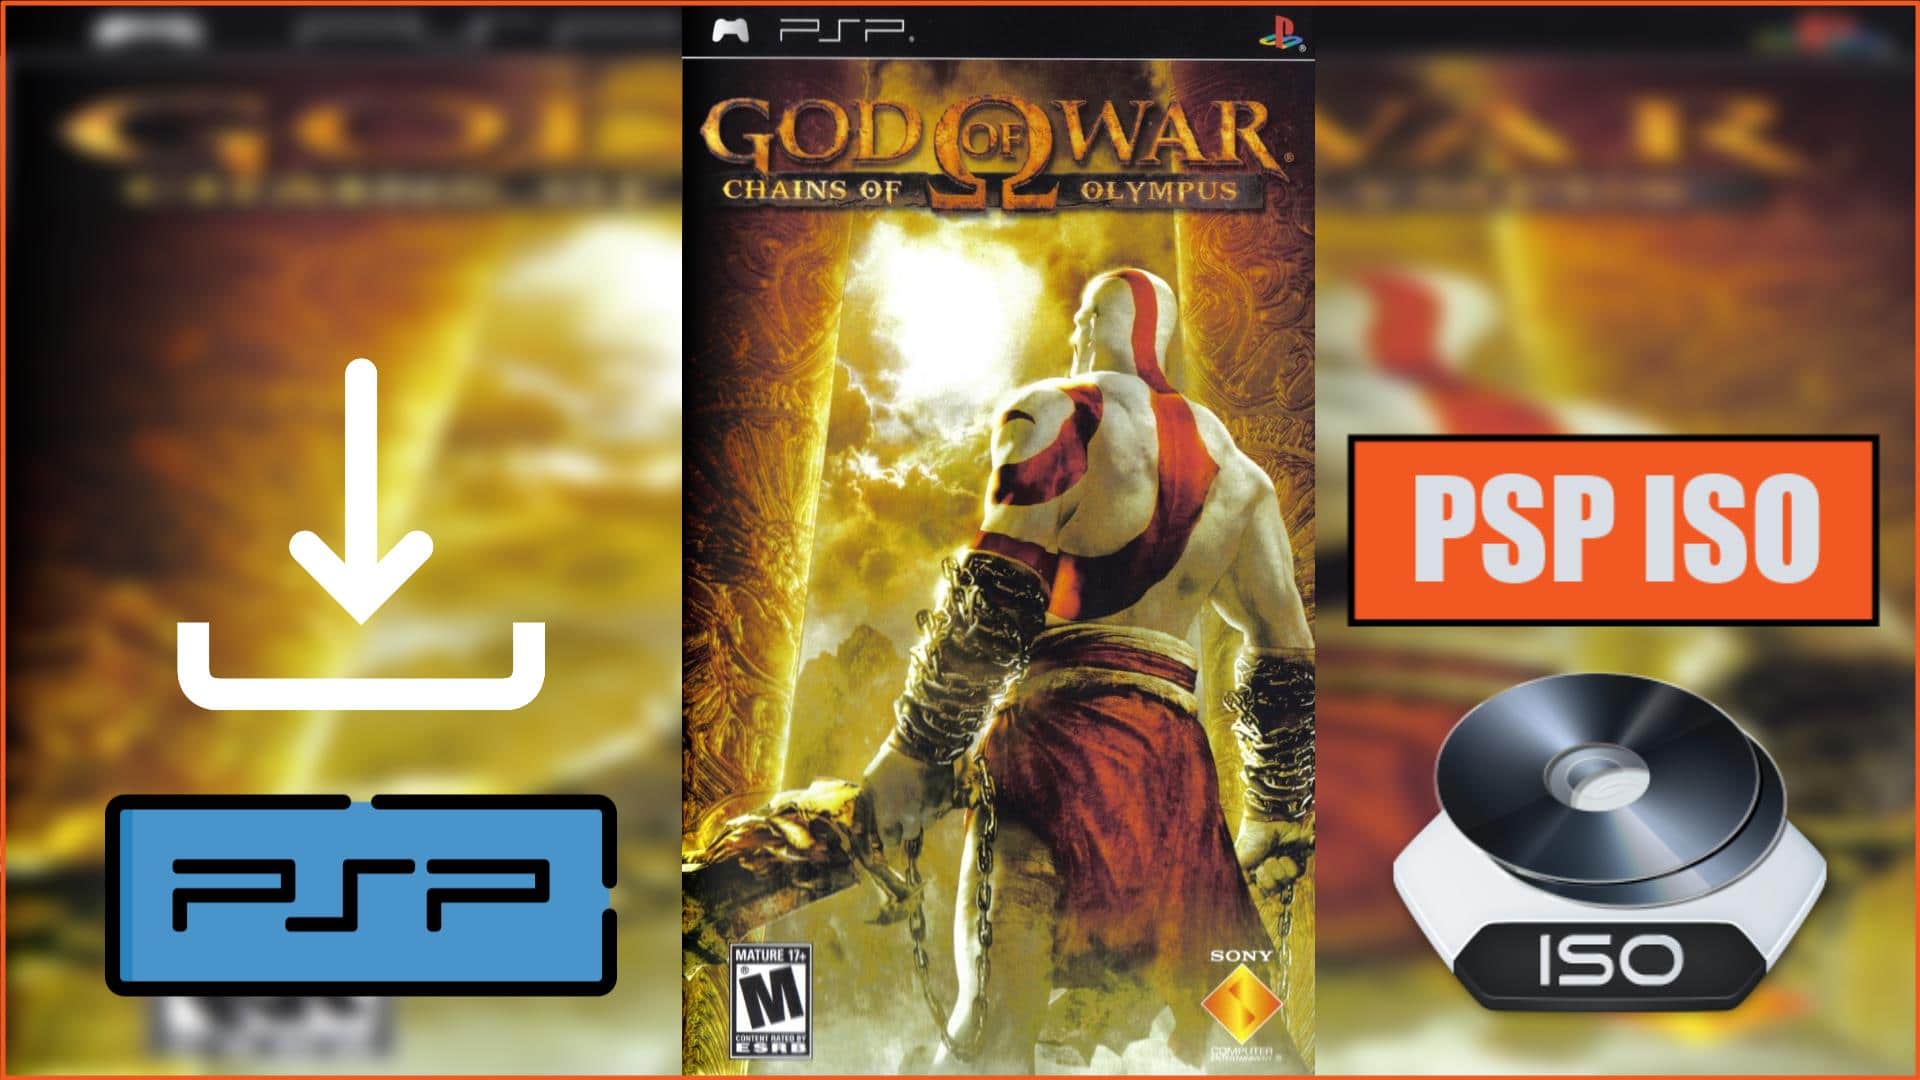 God of War - Chains of Olympus PSP ISO Download